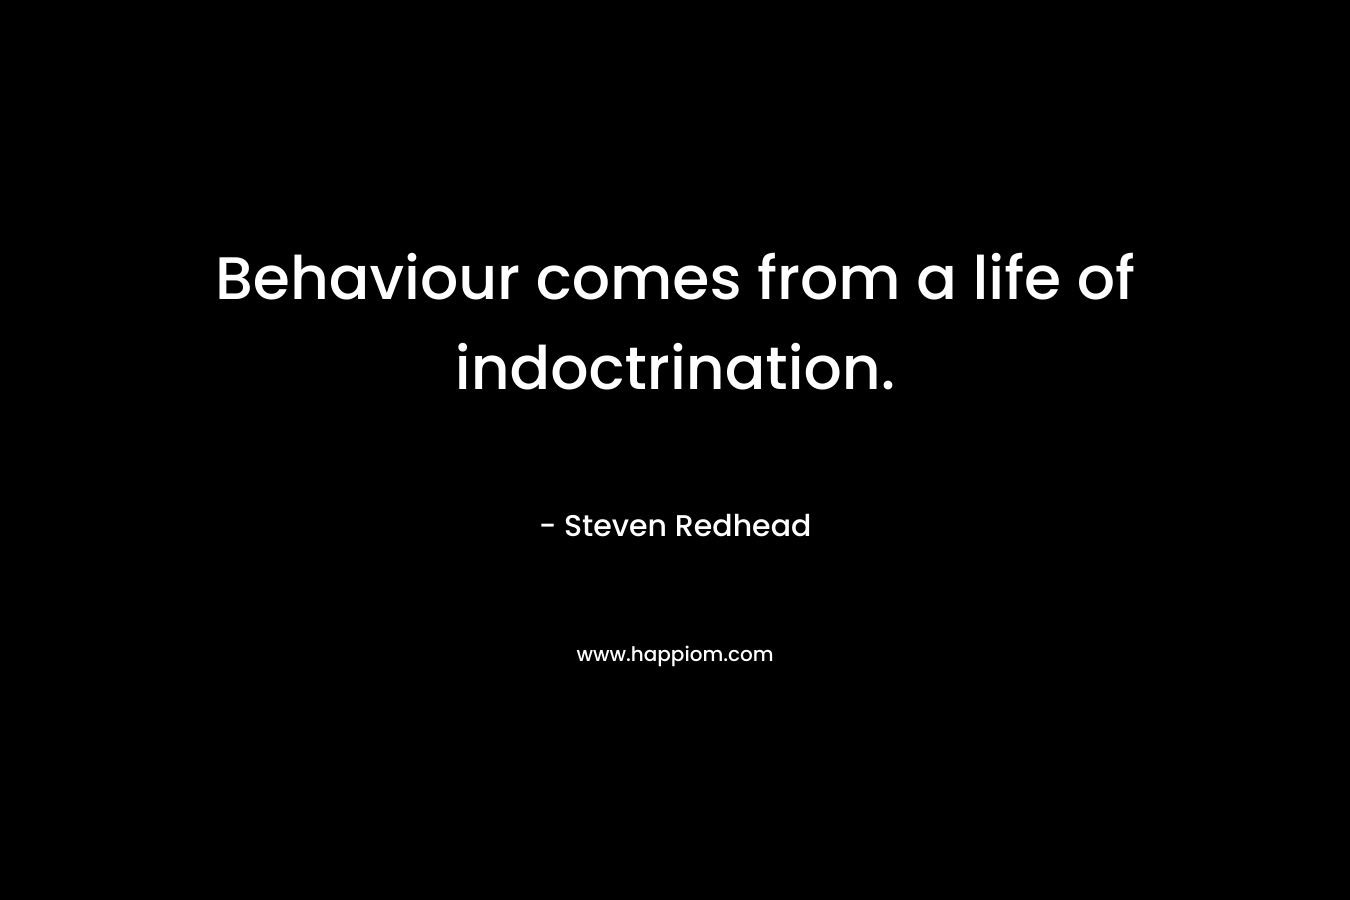 Behaviour comes from a life of indoctrination.